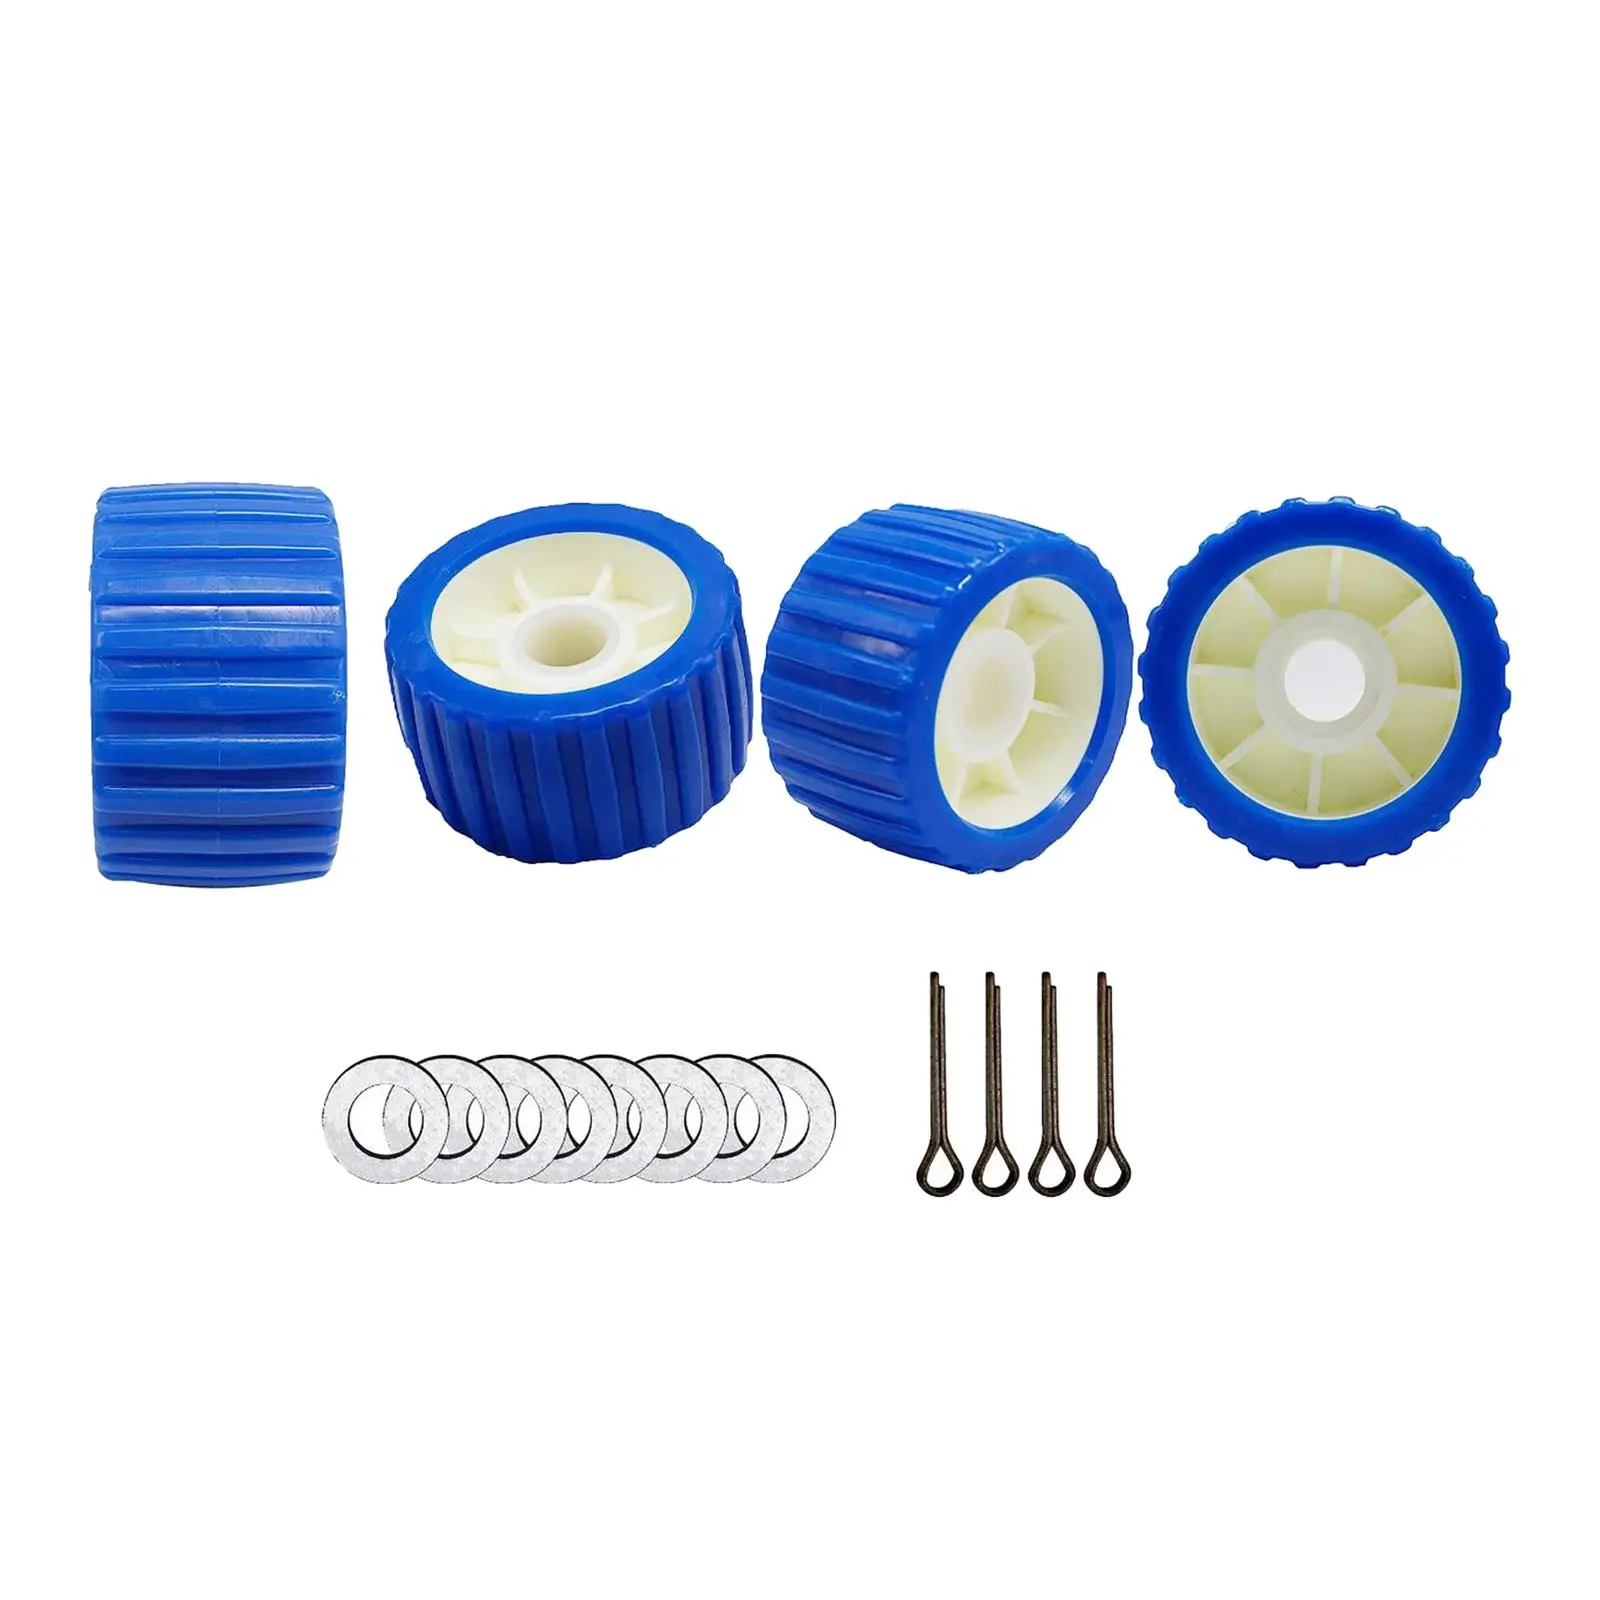 Trailer Roller Universal Plastic Accessory Trailer Parts for Dinghy Rubber Boat Motor Yacht Replace Parts Long Service Life